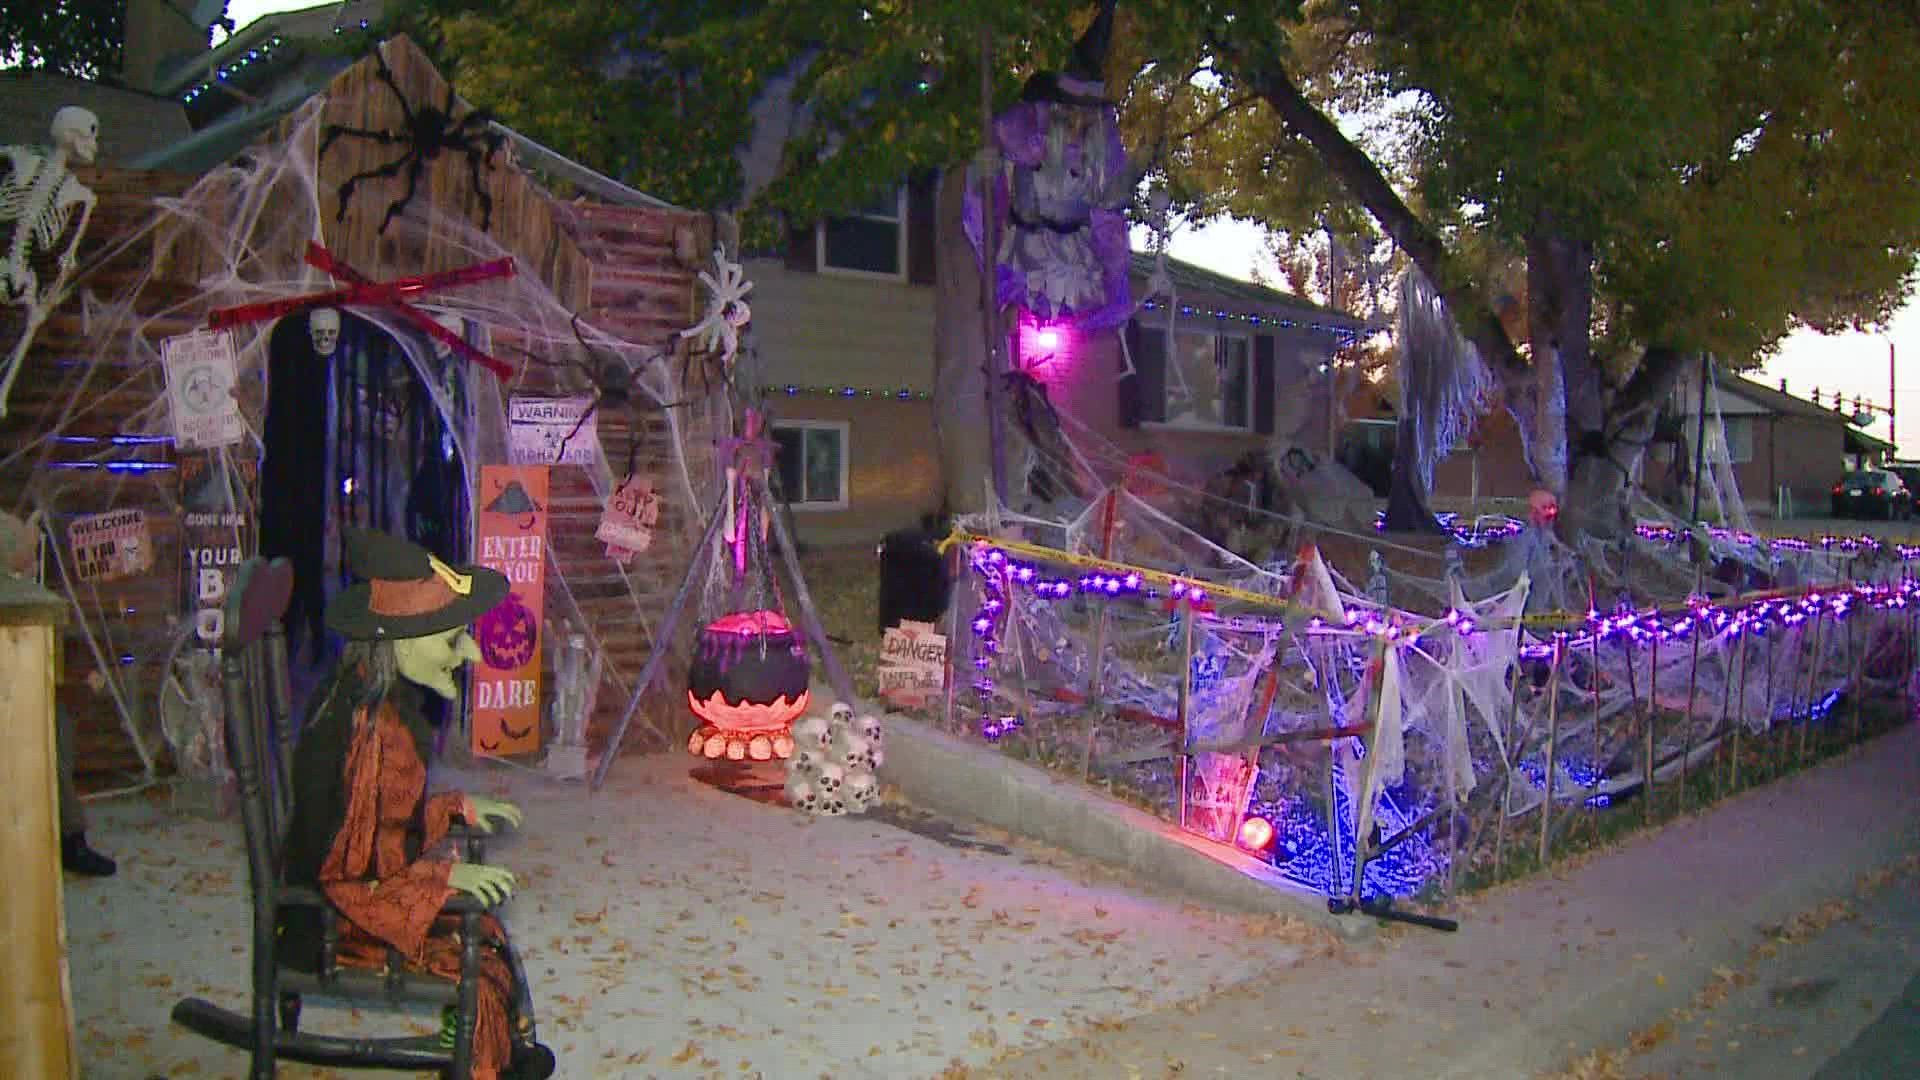 The Holiday family goes all out for Halloween. They put a lot of love and jump scares into their display.